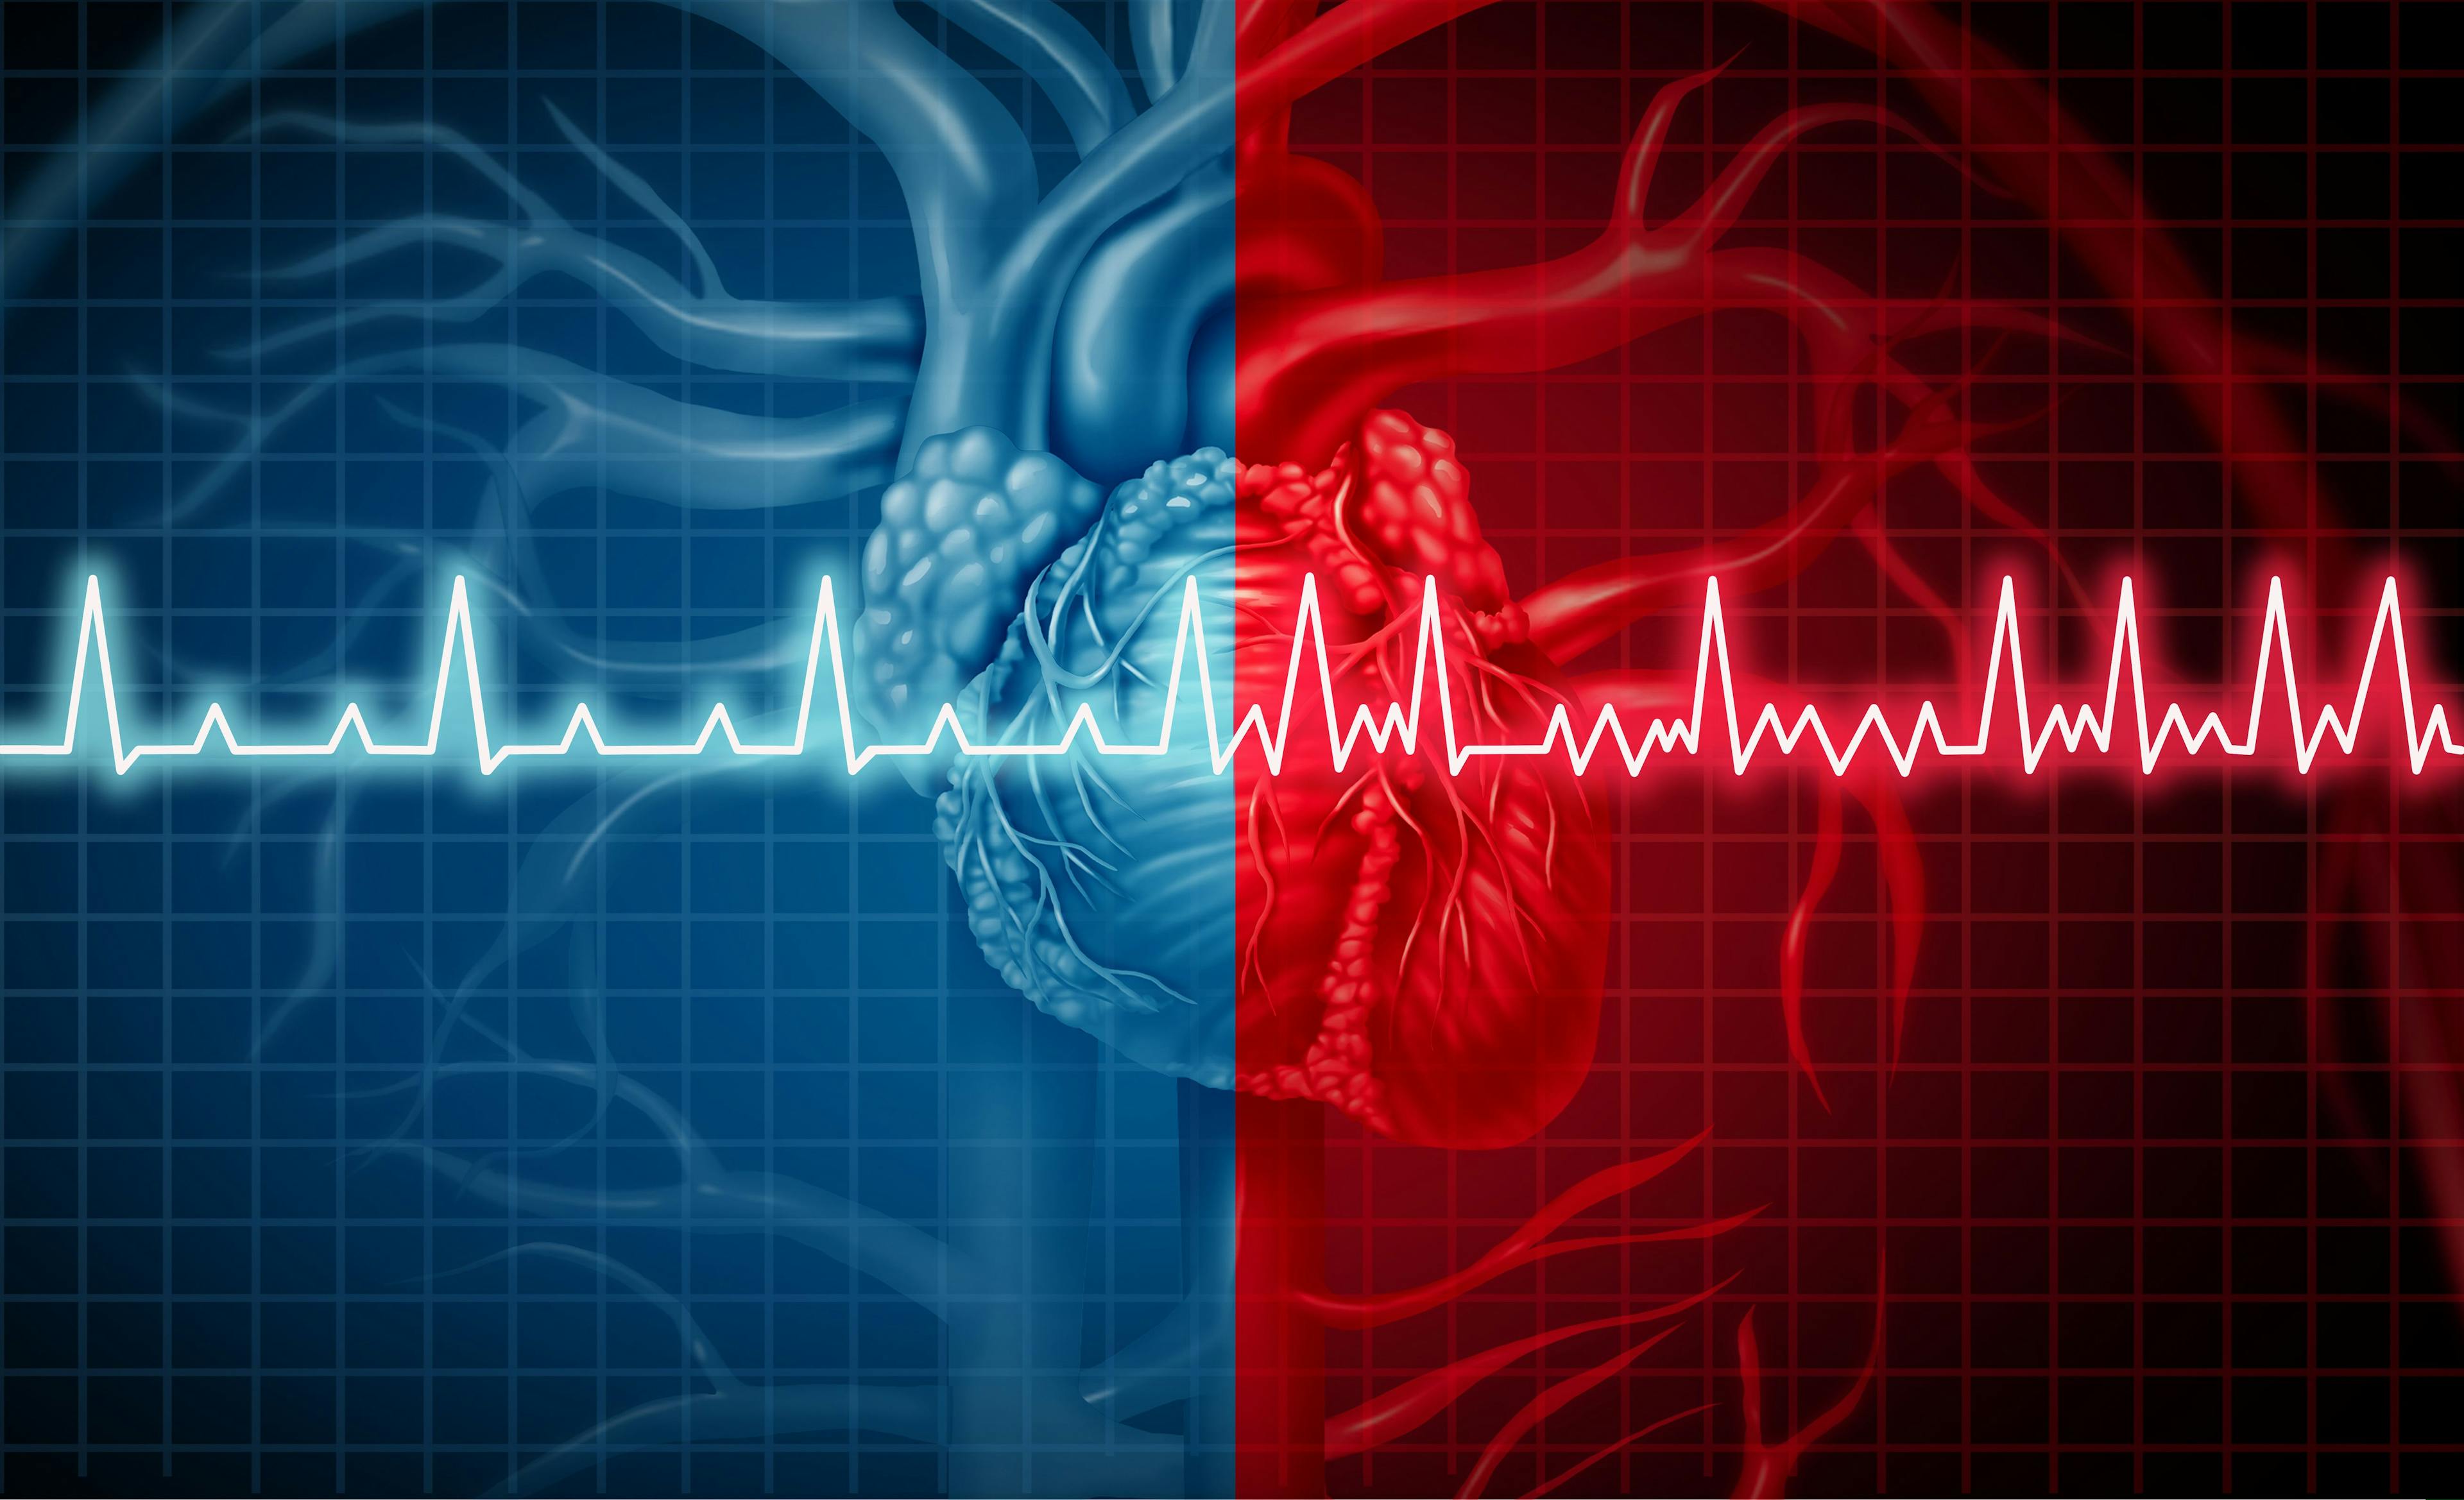 Disease-associated Genetic Variants Common Among Those With Early-onset Afib, Study Finds